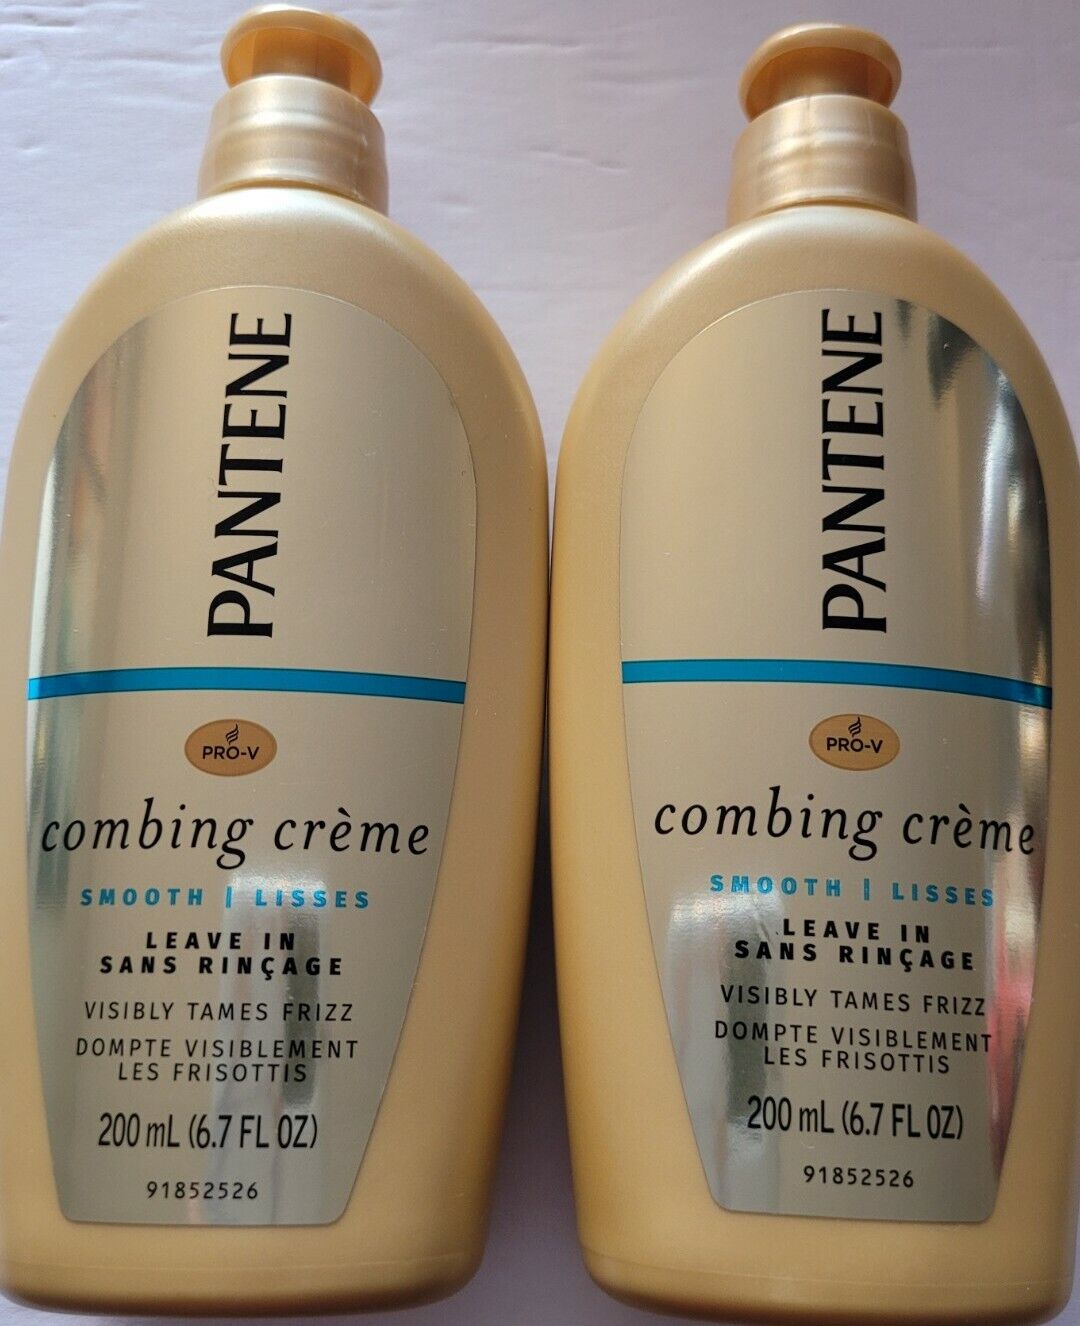 2 Pantene Pro-V Combing Creme Smooth Leave In Tames Frizz 6.7 FL oz Unopened 